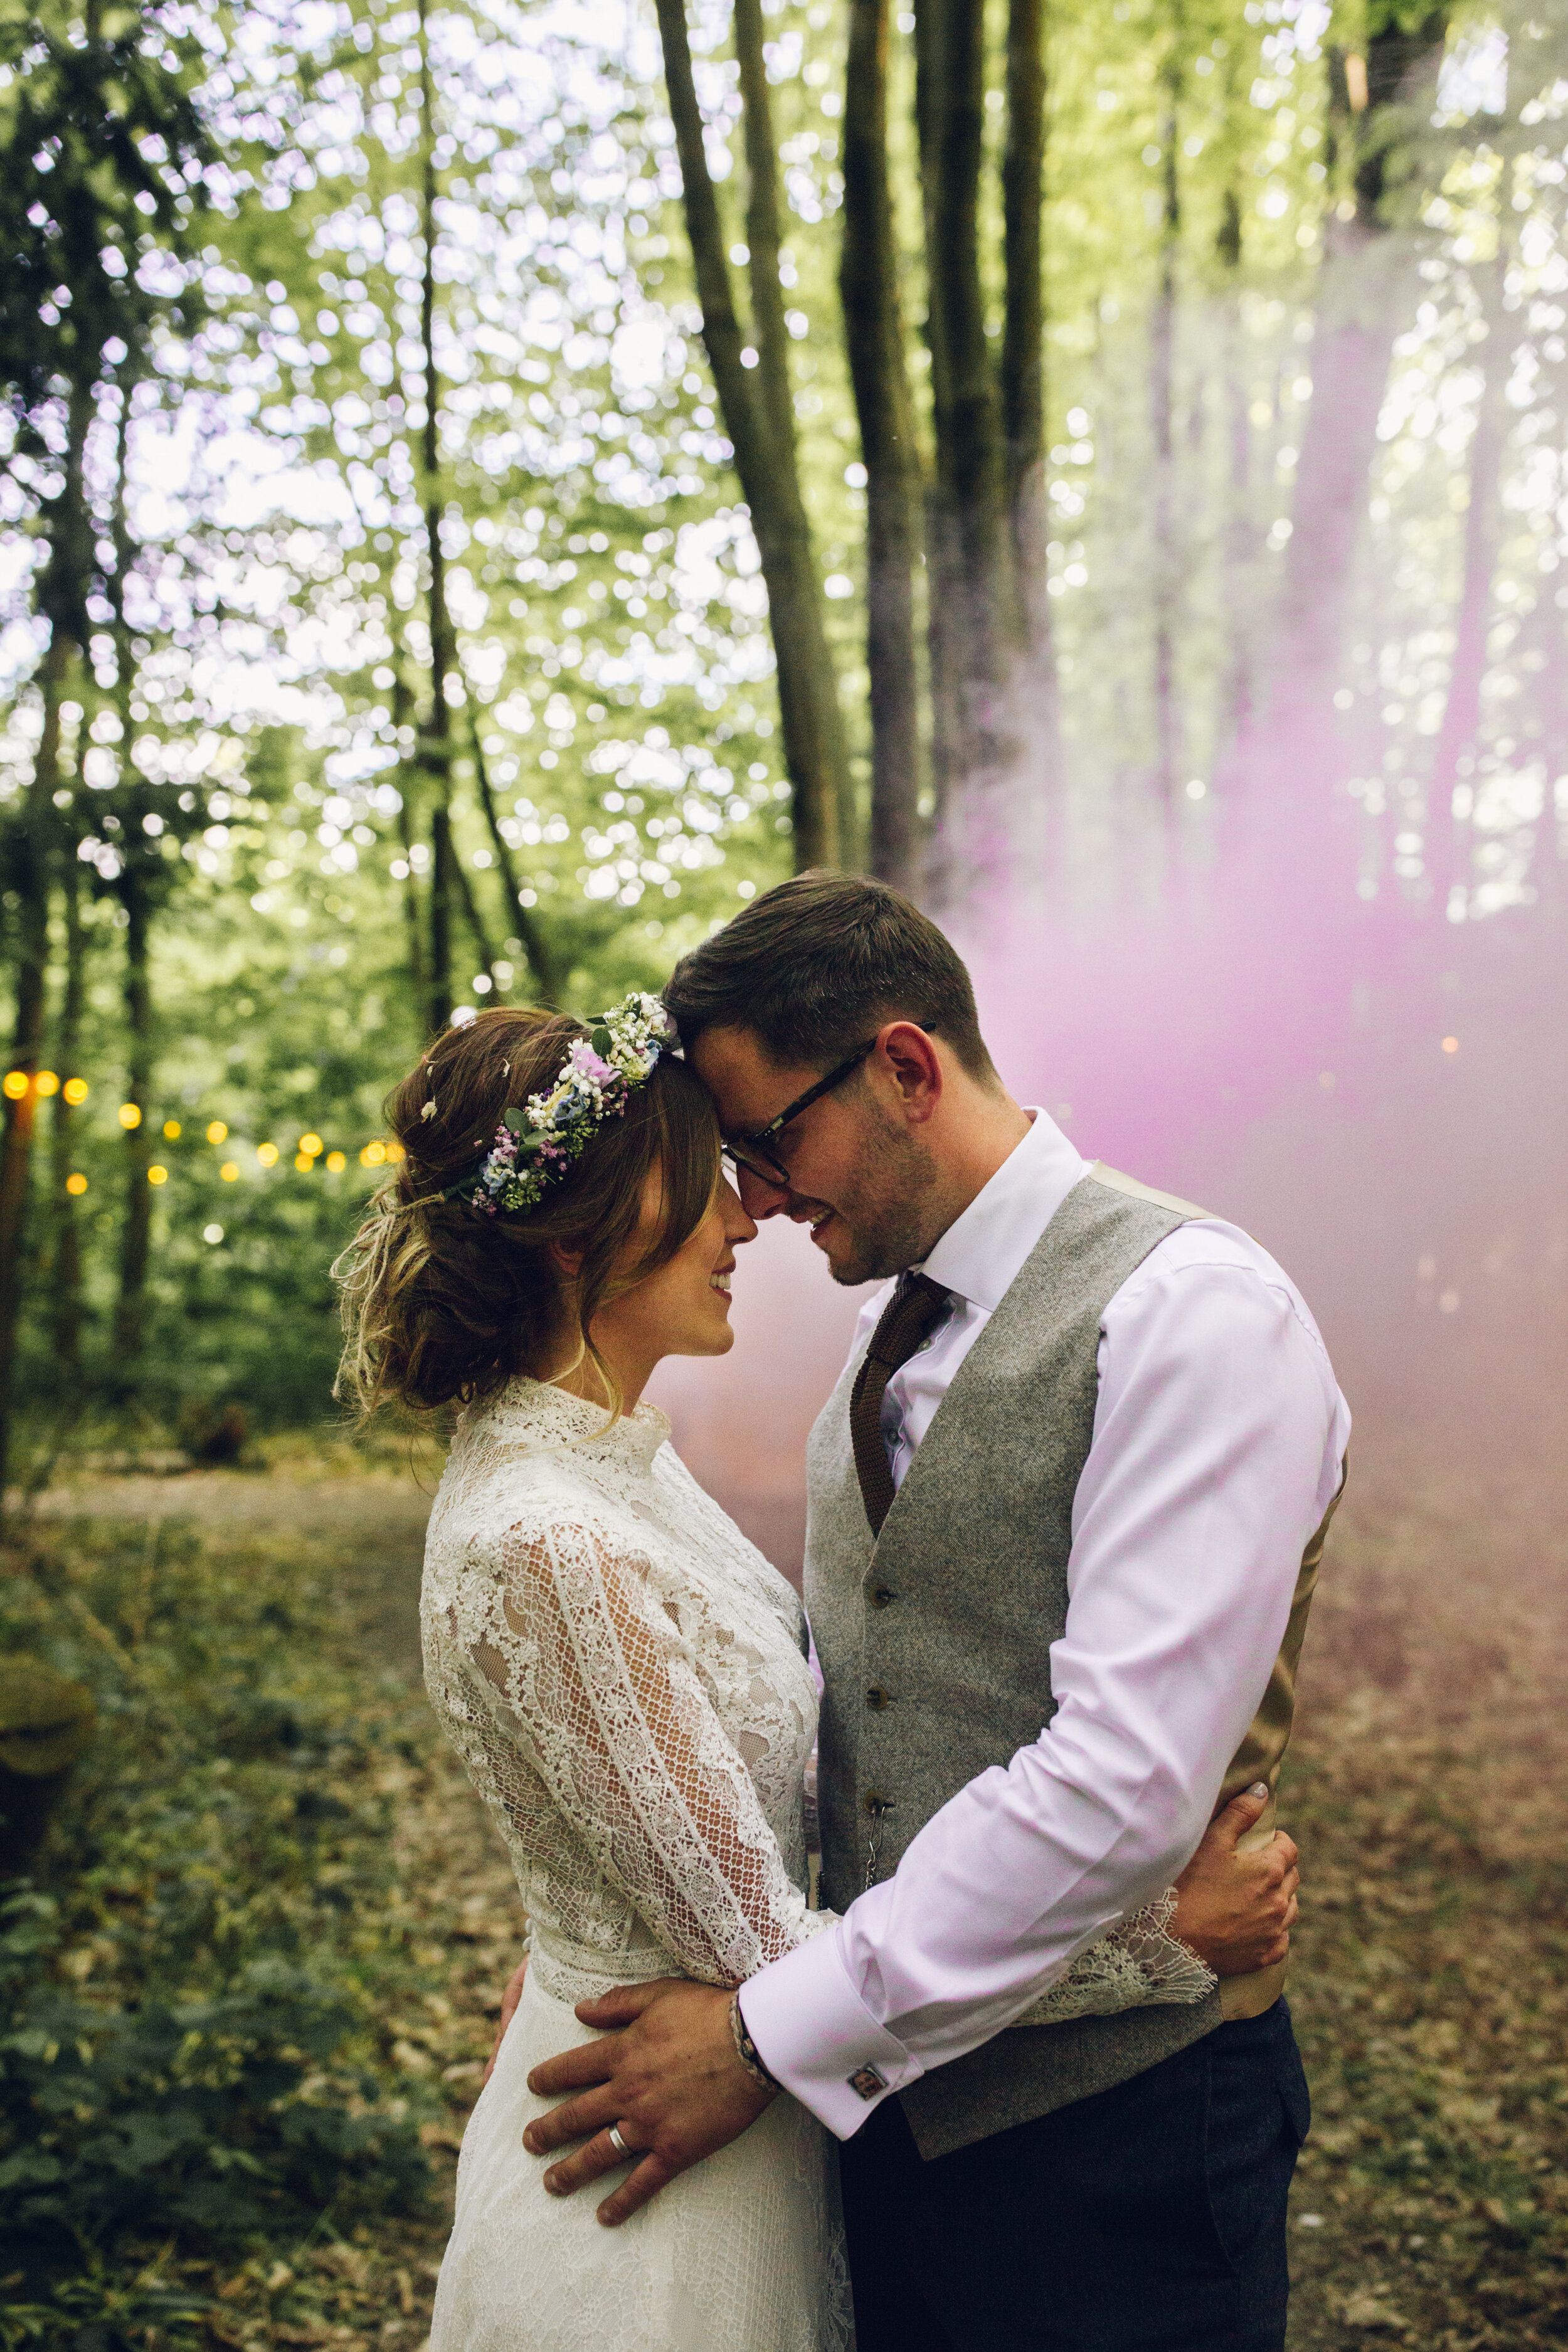 Colourful Wedding Photography with Smokebombs